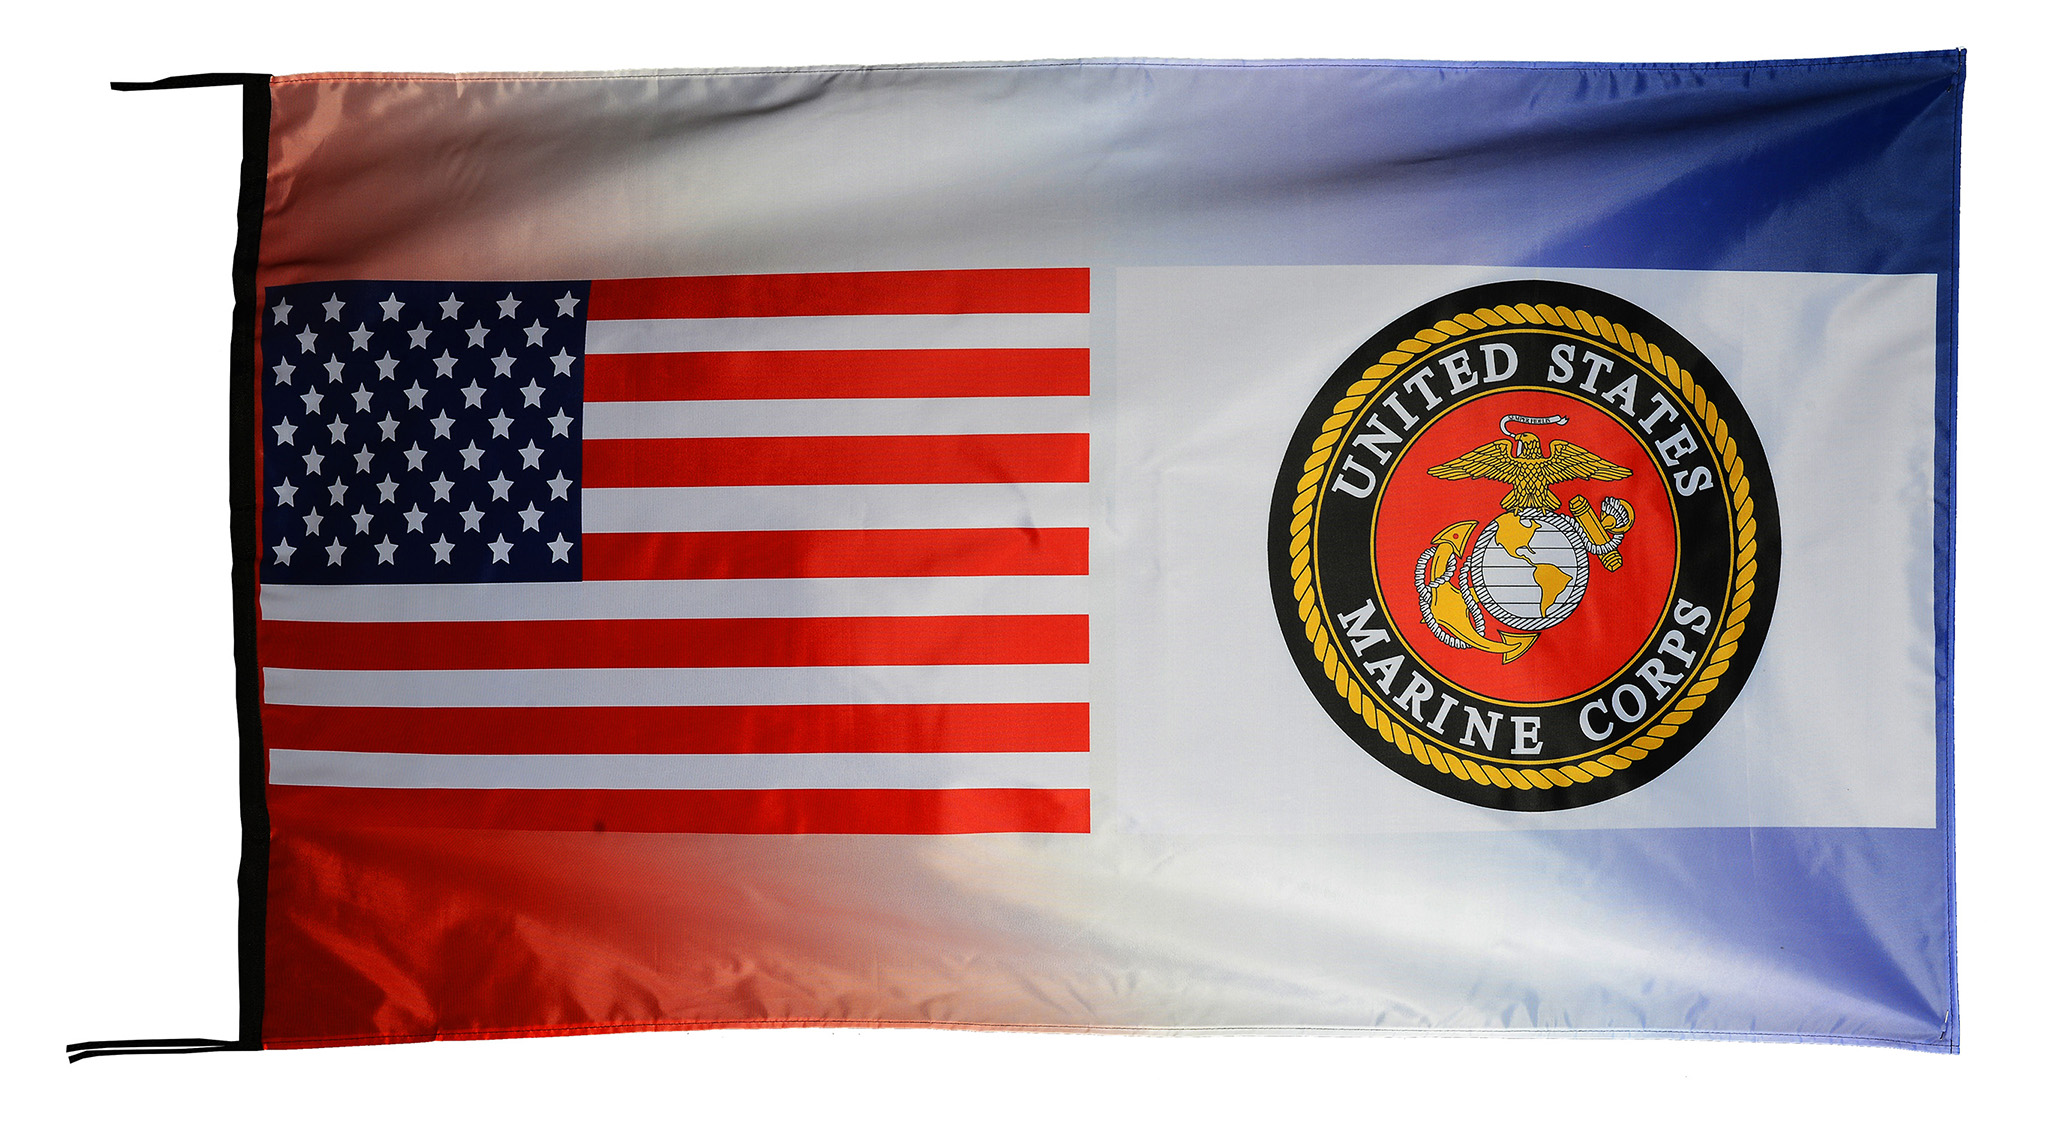 Flag  153 USA / US Country / United States Of America and US United States Marine Corps (White Background) / Patriotic / Pride Hybrid Weather-Resistant Polyester Outdoor Flag Landscape Banner / Vivid Colors / 3 X 5 FT (150 x 90cm) International Flags for Sale